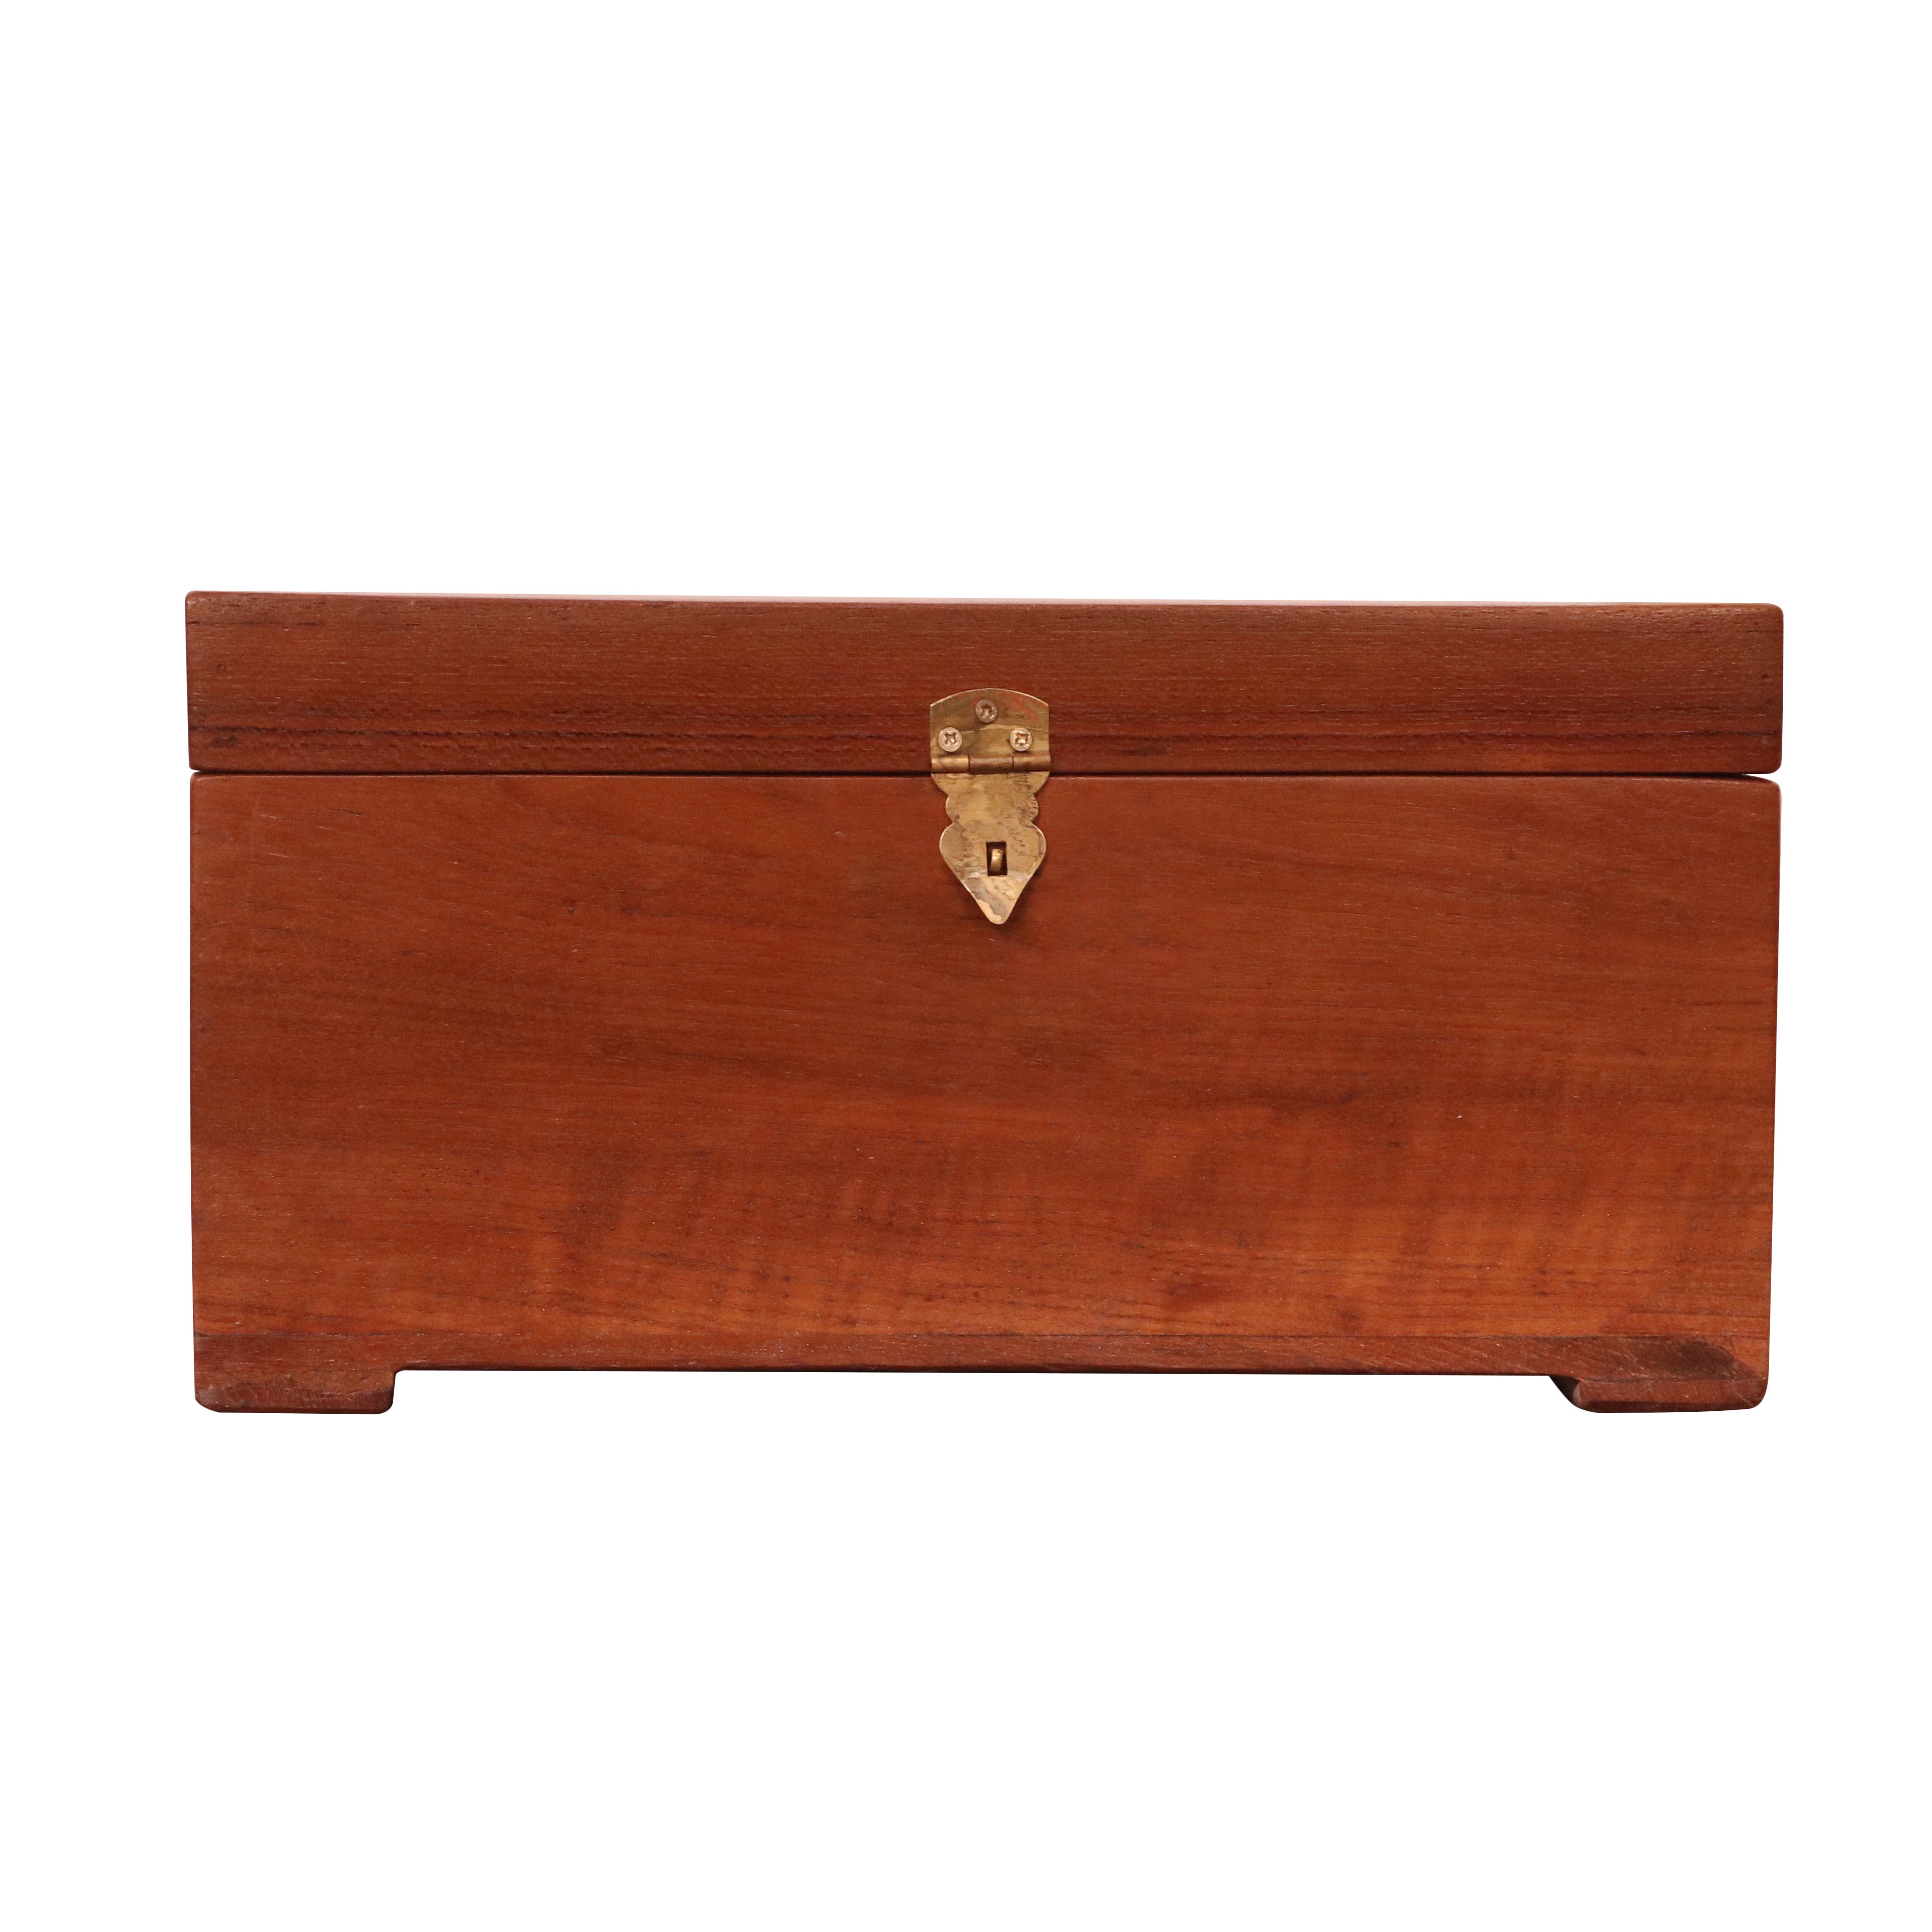 Solid wood wooden box with compartments Wooden Box